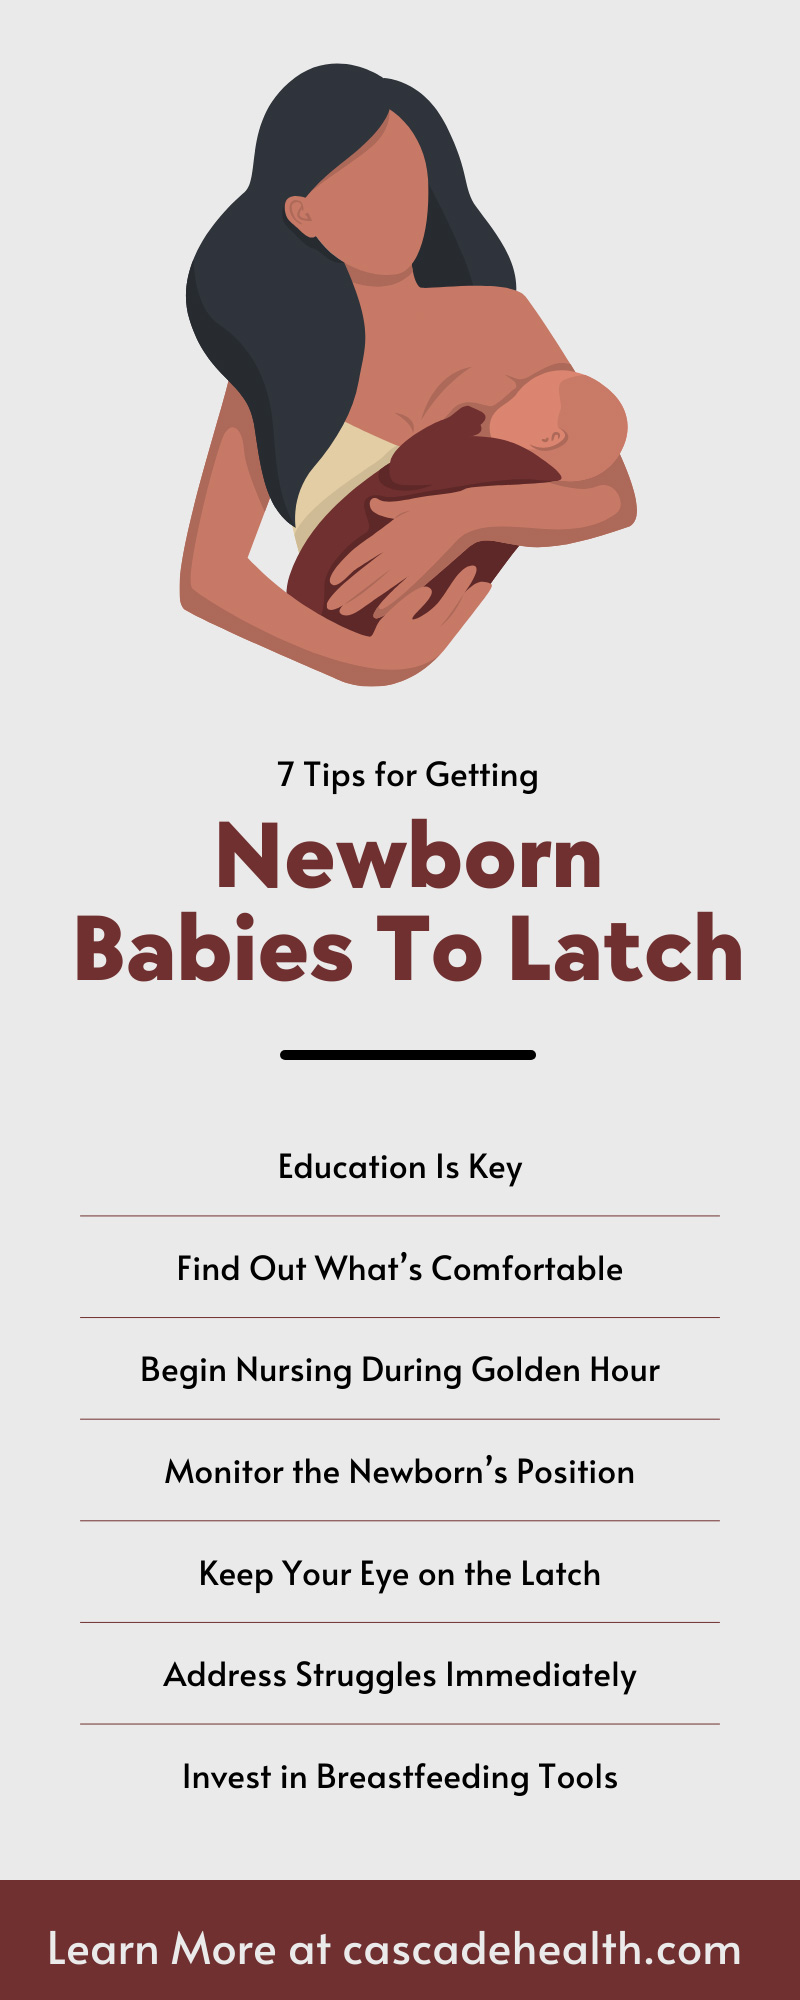 7 Tips for Getting Newborn Babies To Latch